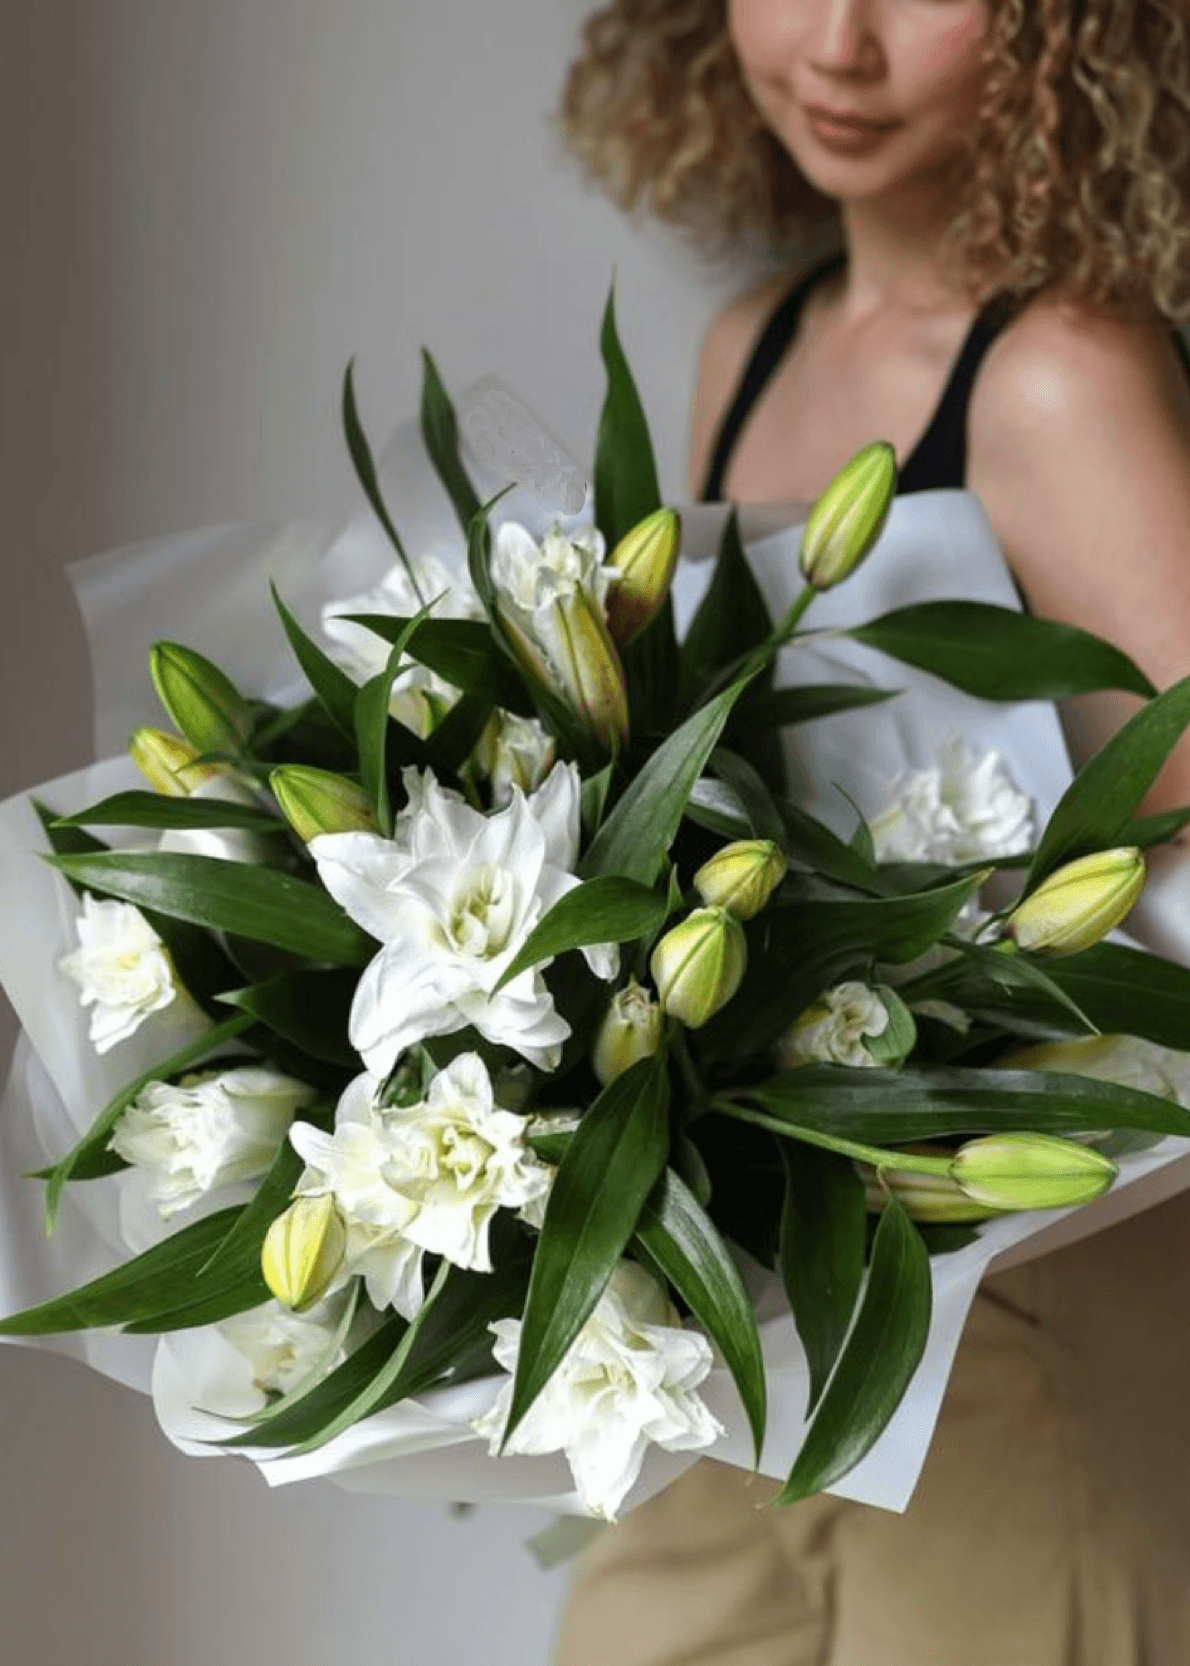 NO. 57. Bouquet of Lilies